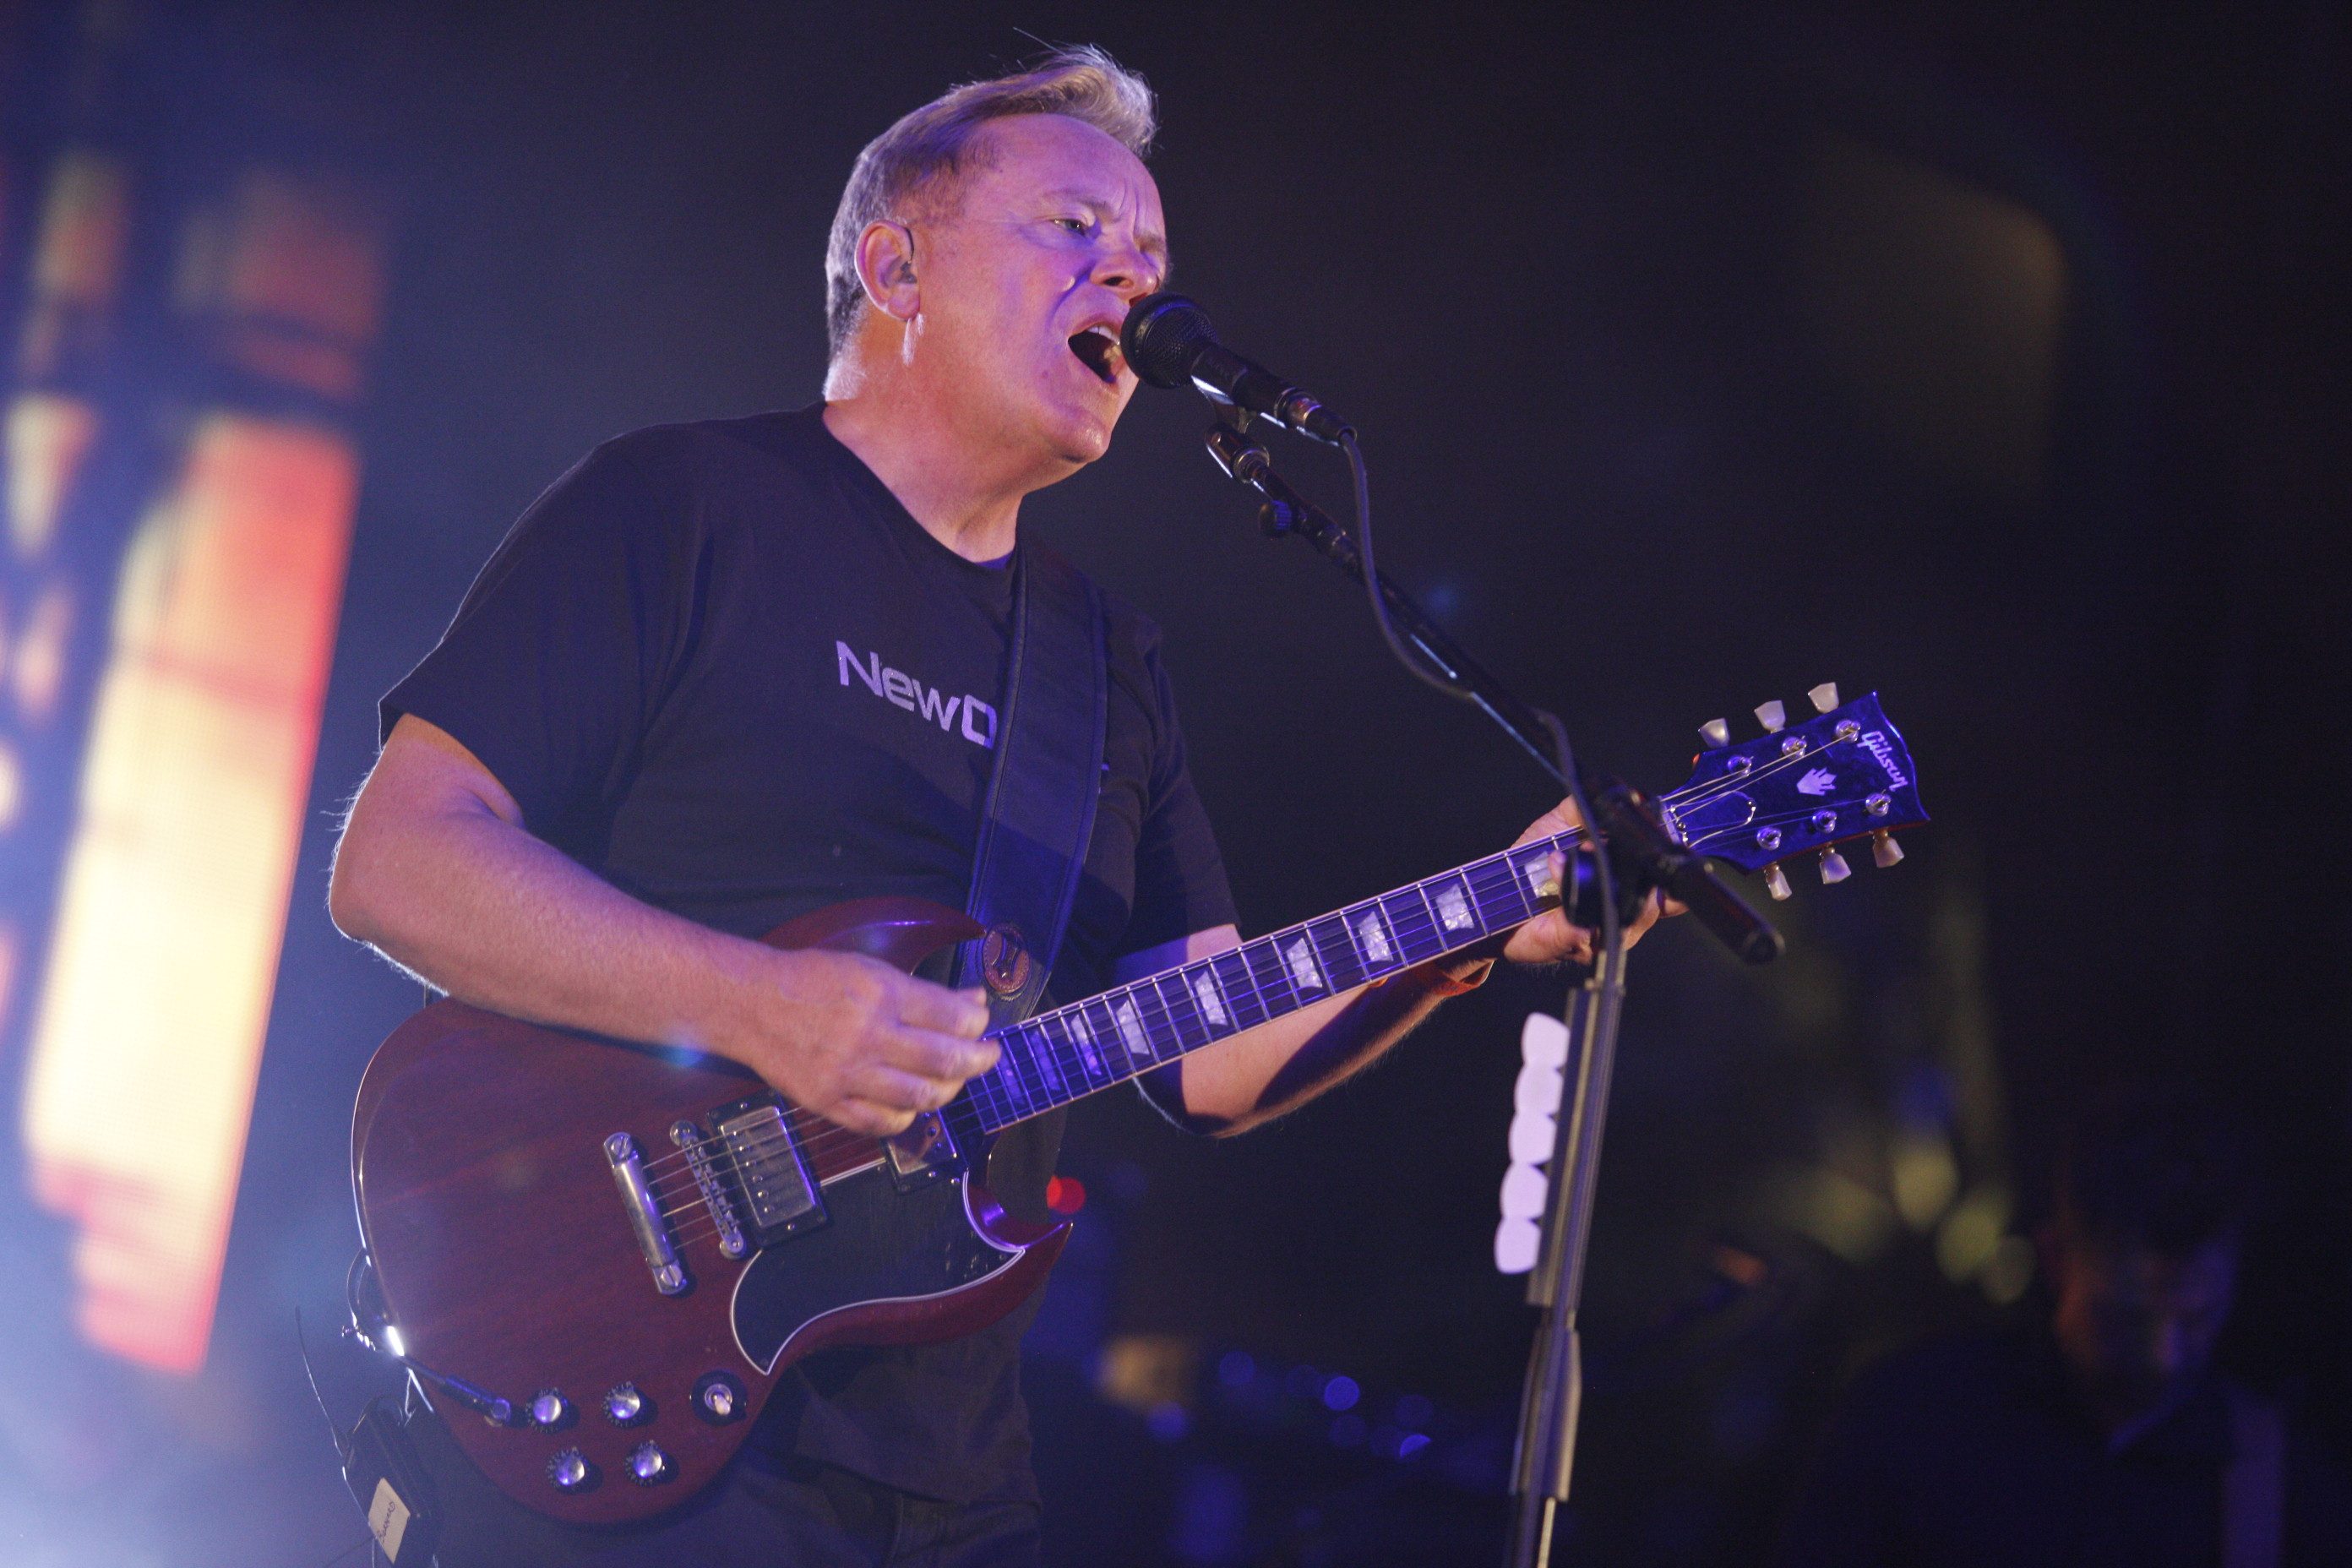 SXSW 2023 Announces Third Wave of Lineups Featuring New Order, Tangerine Dream, Killer Mike and More